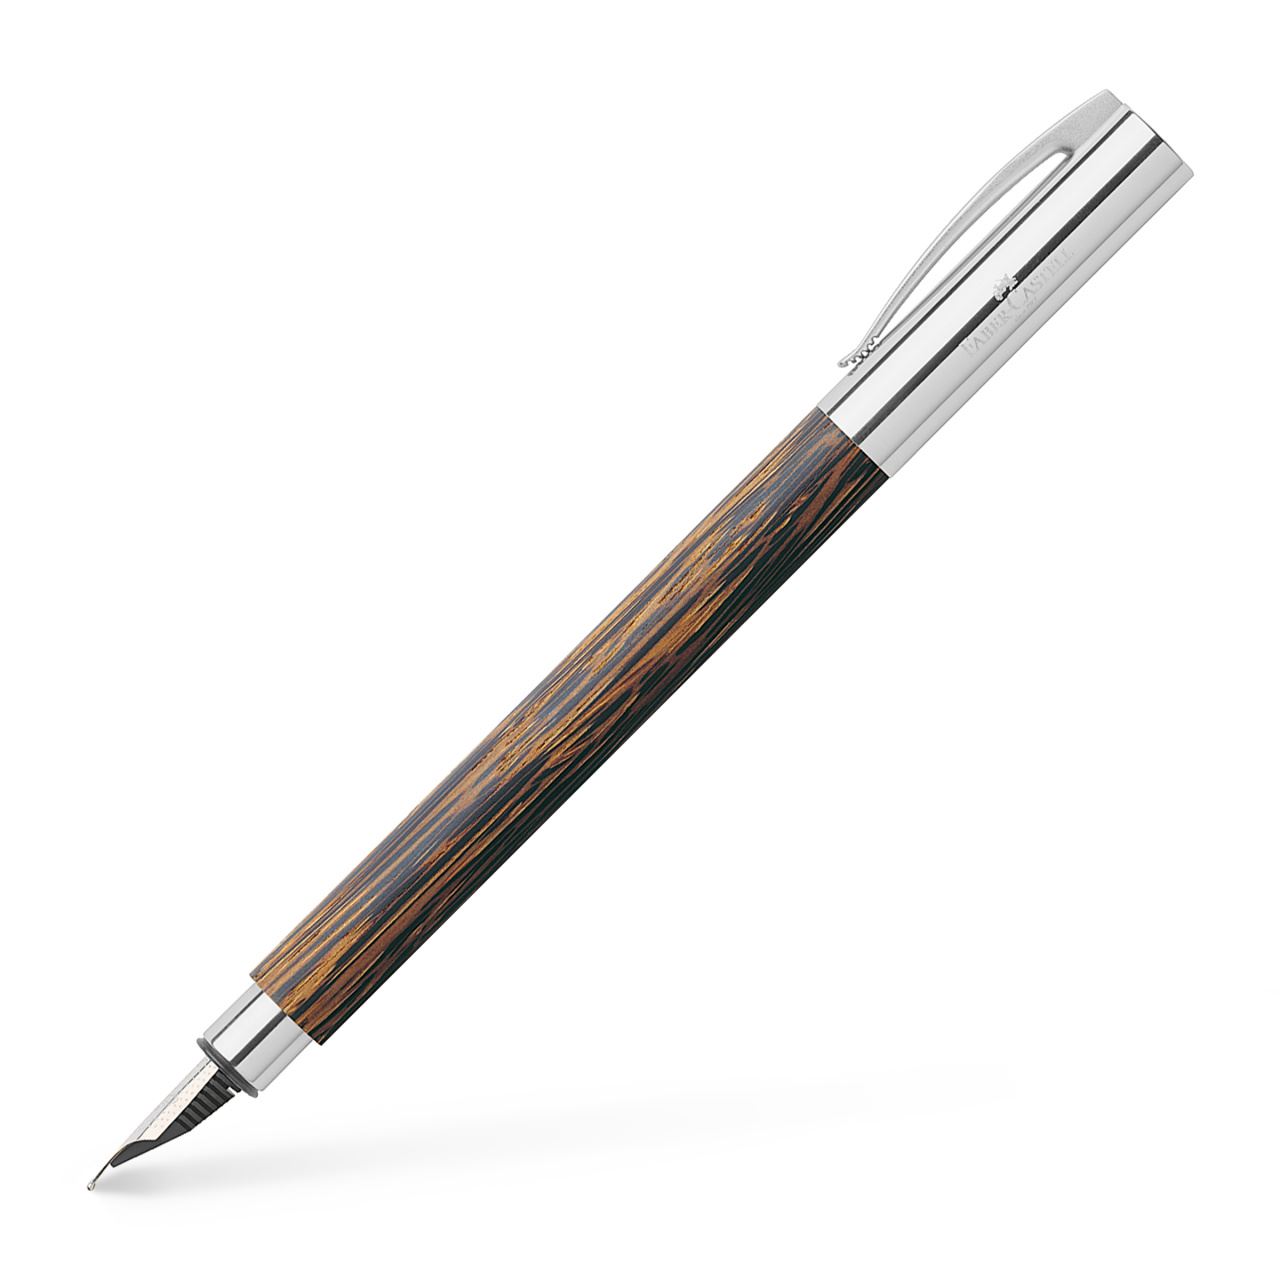 Faber-Castell - Ambition coconut fountain pen, F